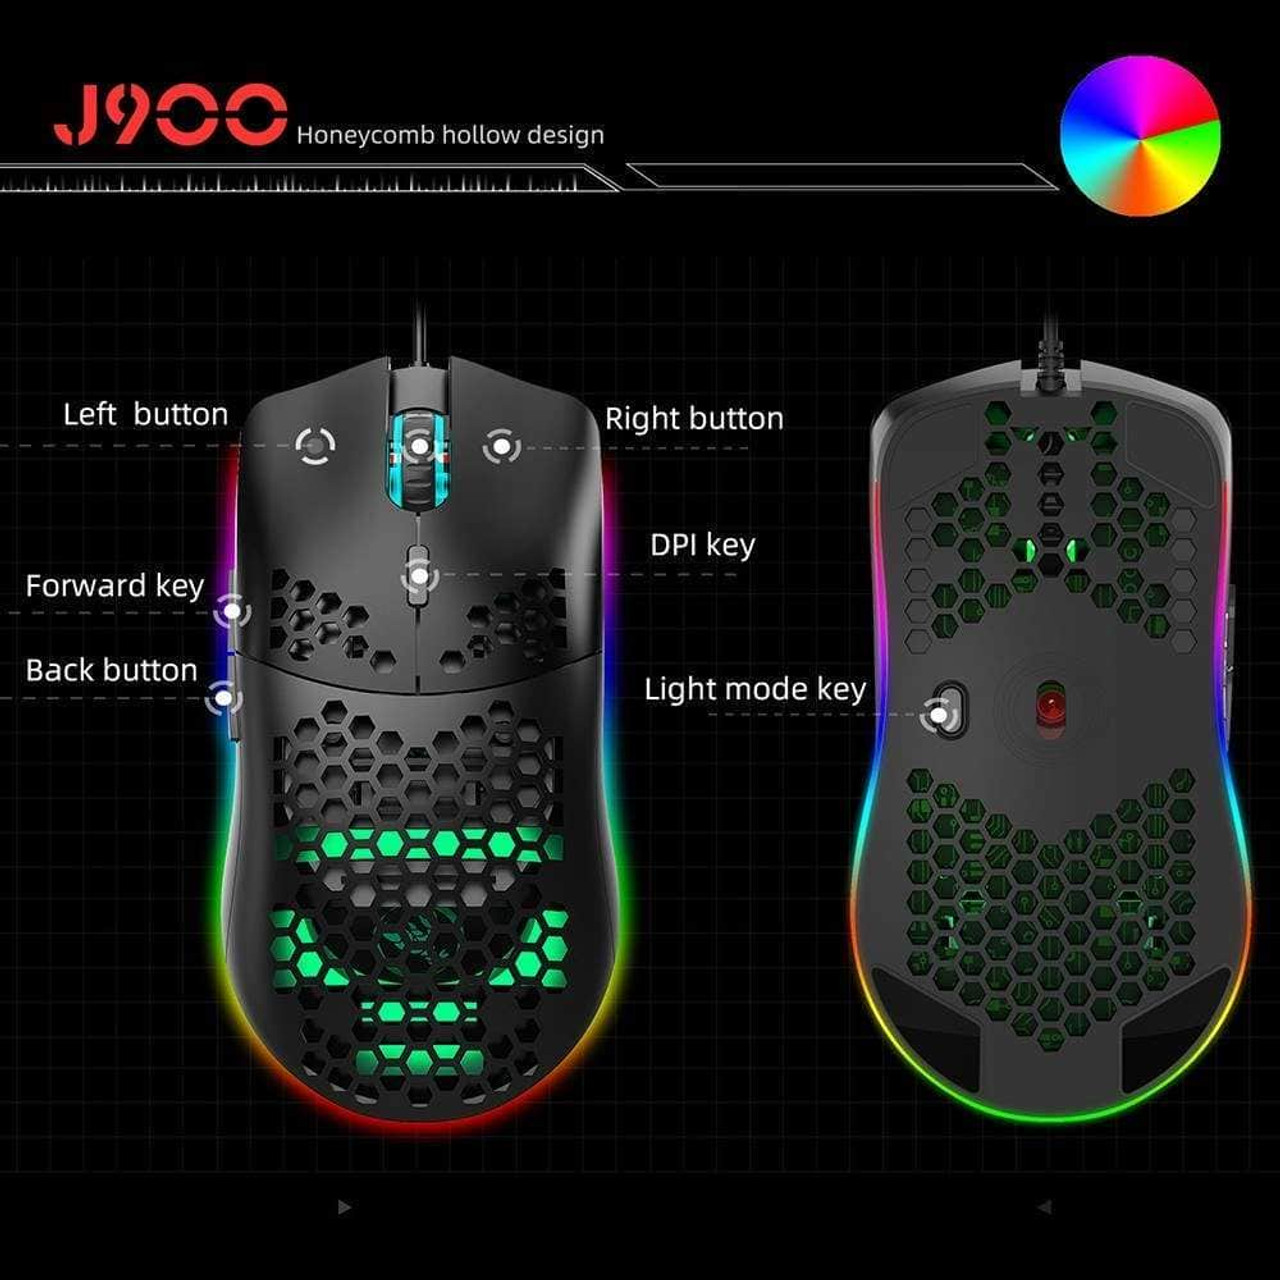 HXSJ J900 USB Wired Gaming Mouse RGB with Six Adjustable DPI Up to 6400